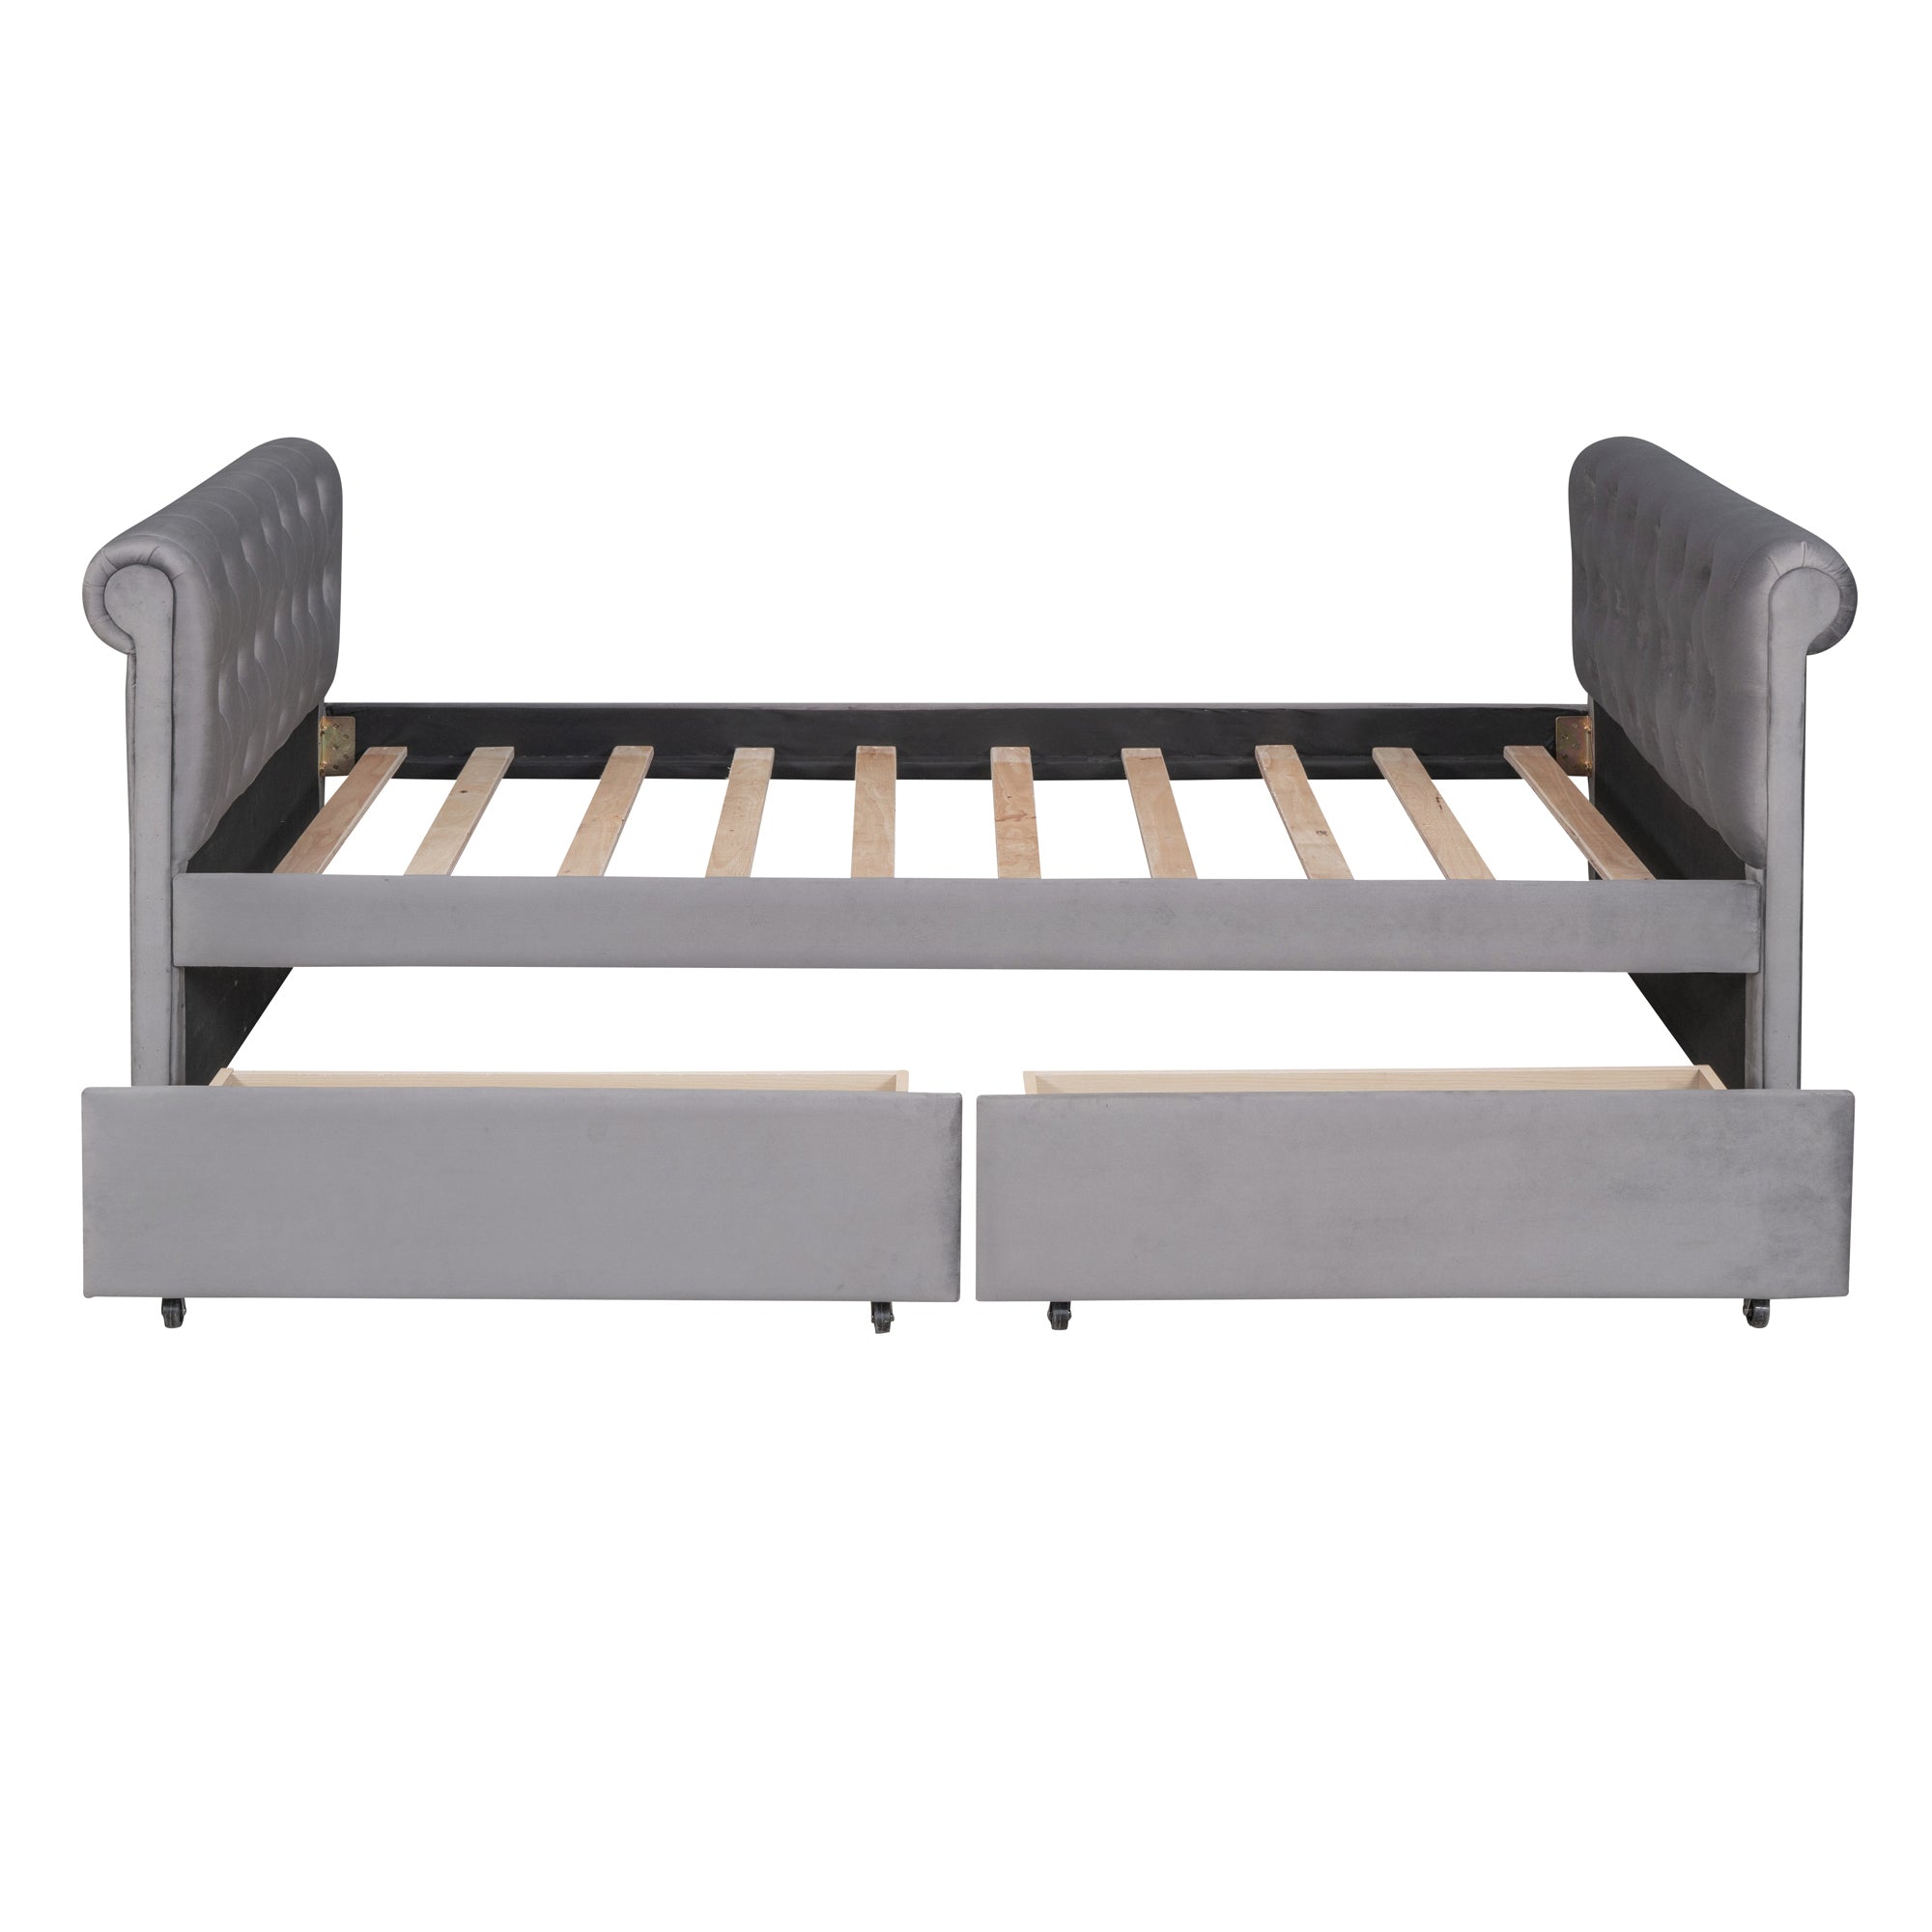 Twin Size Upholstered daybed with Drawers, Wood Slat gray-upholstered